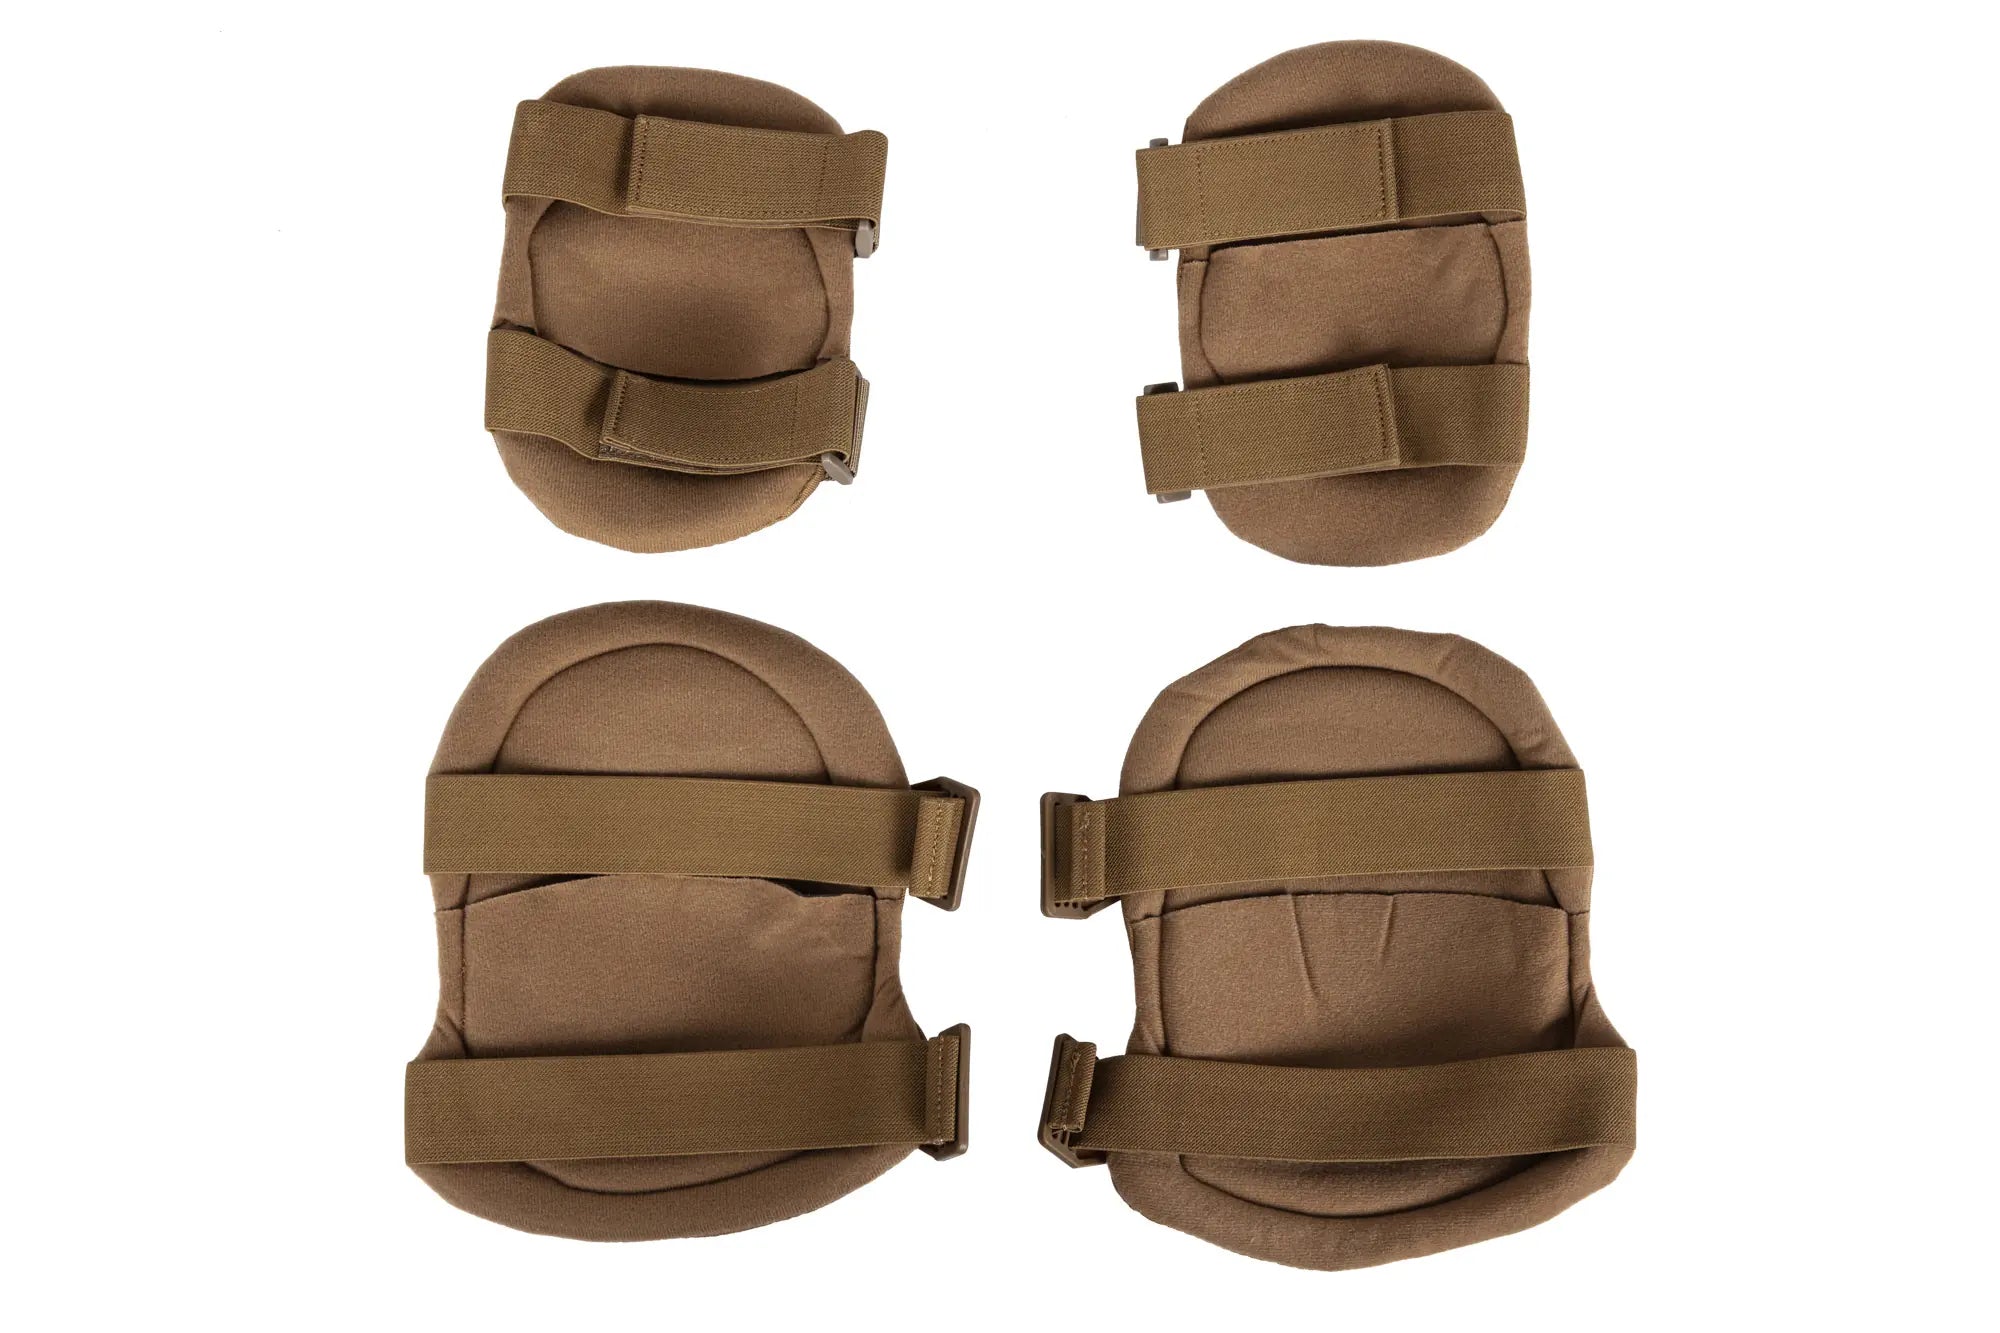 Wosport PA-07 Tan knee and elbow protector set-1